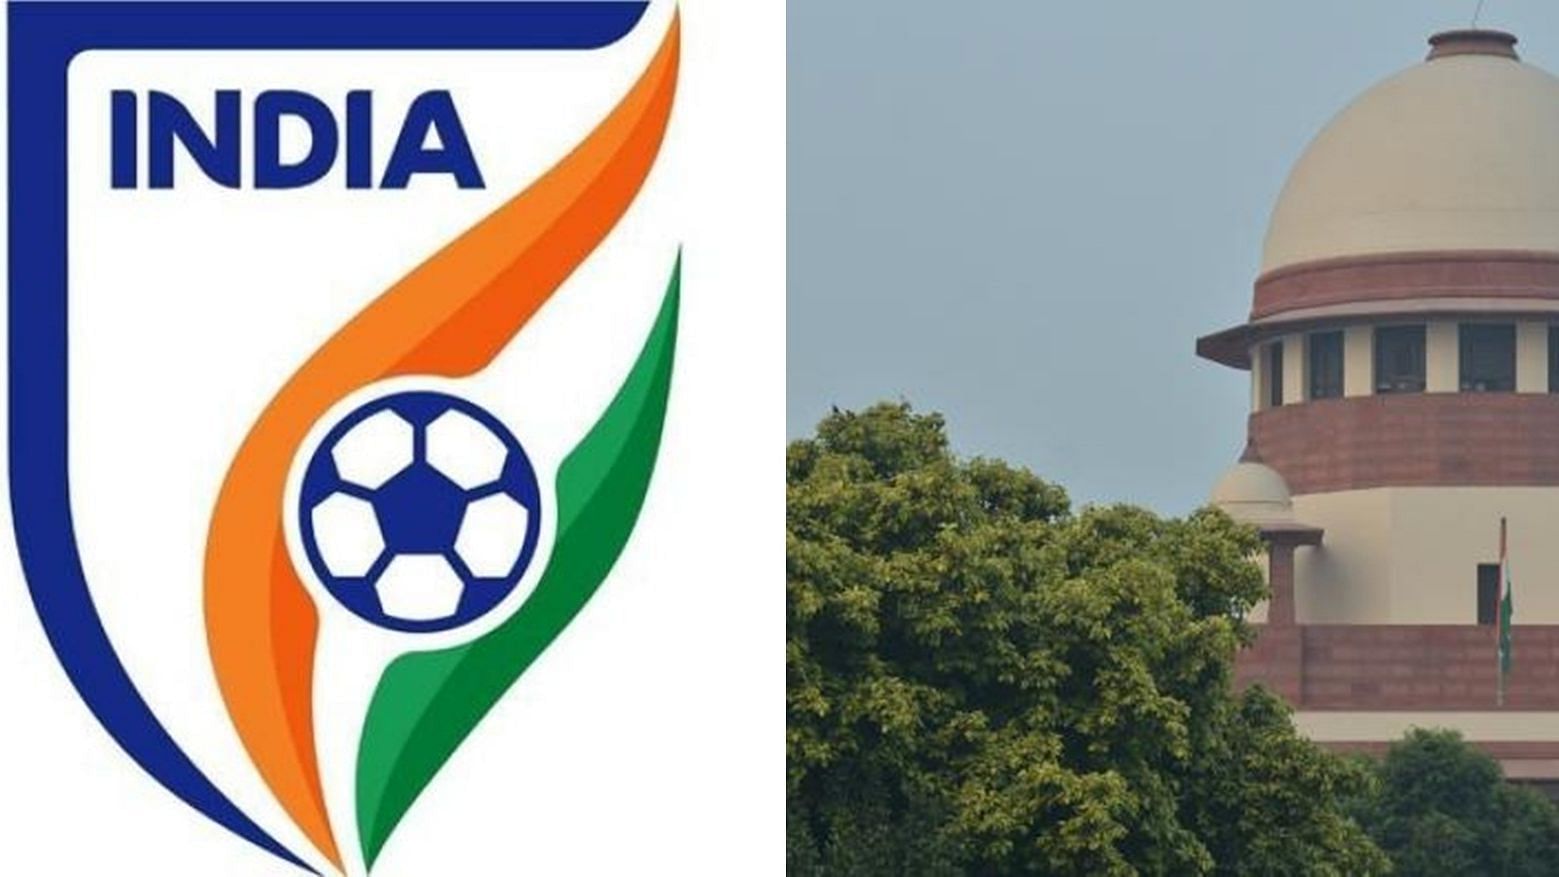 <div class="paragraphs"><p>Fresh dates for the elections to the All India Football Federation (AIFF) executive committee were issued by returning officer&nbsp;Umesh Sharma following the removal of the CoA by the Supreme Court.&nbsp;</p></div>